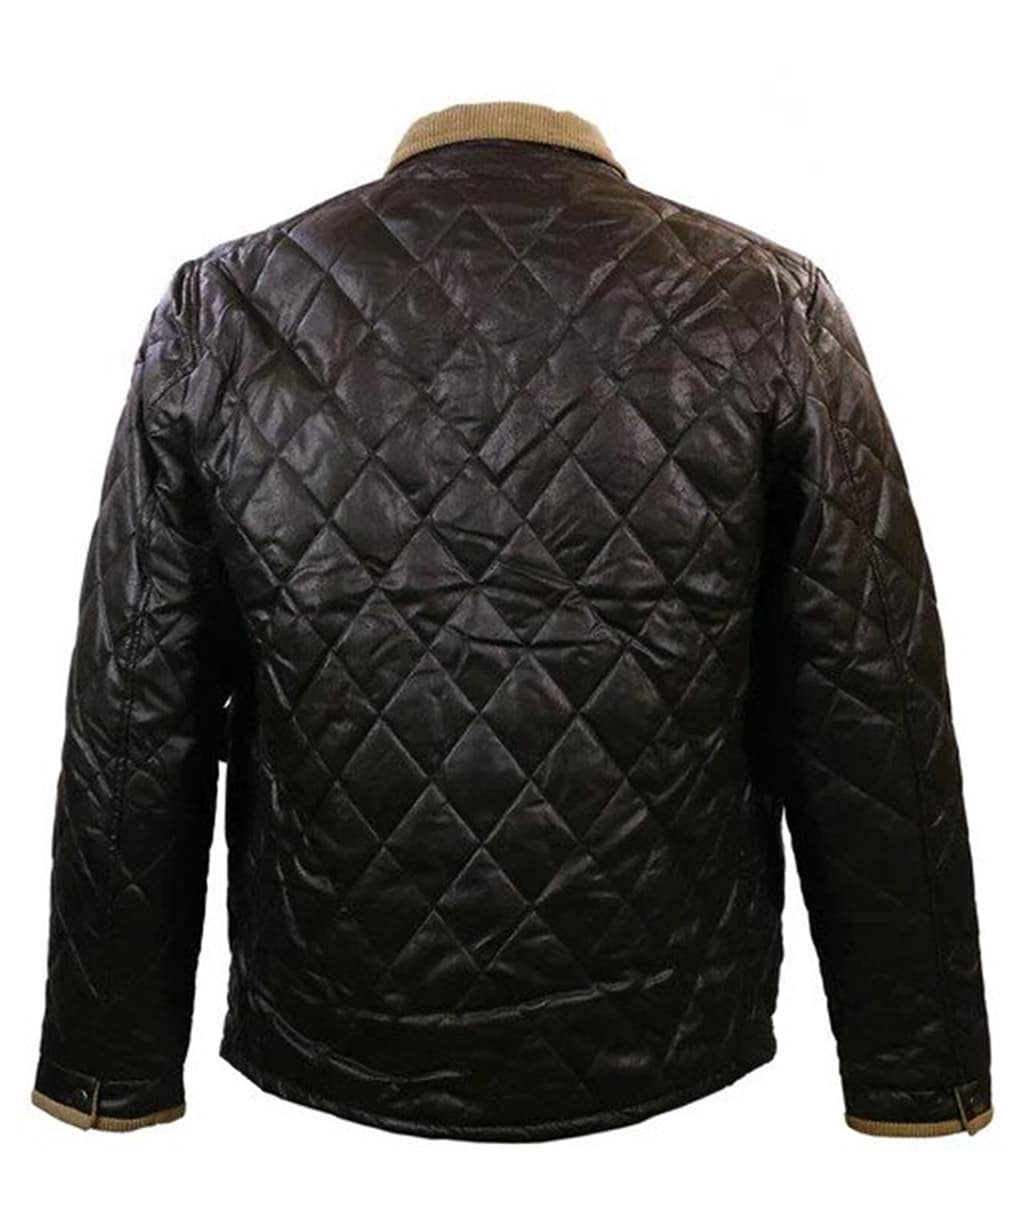 john-dutton-yellowstone-black-quilted-leather-jacket-men